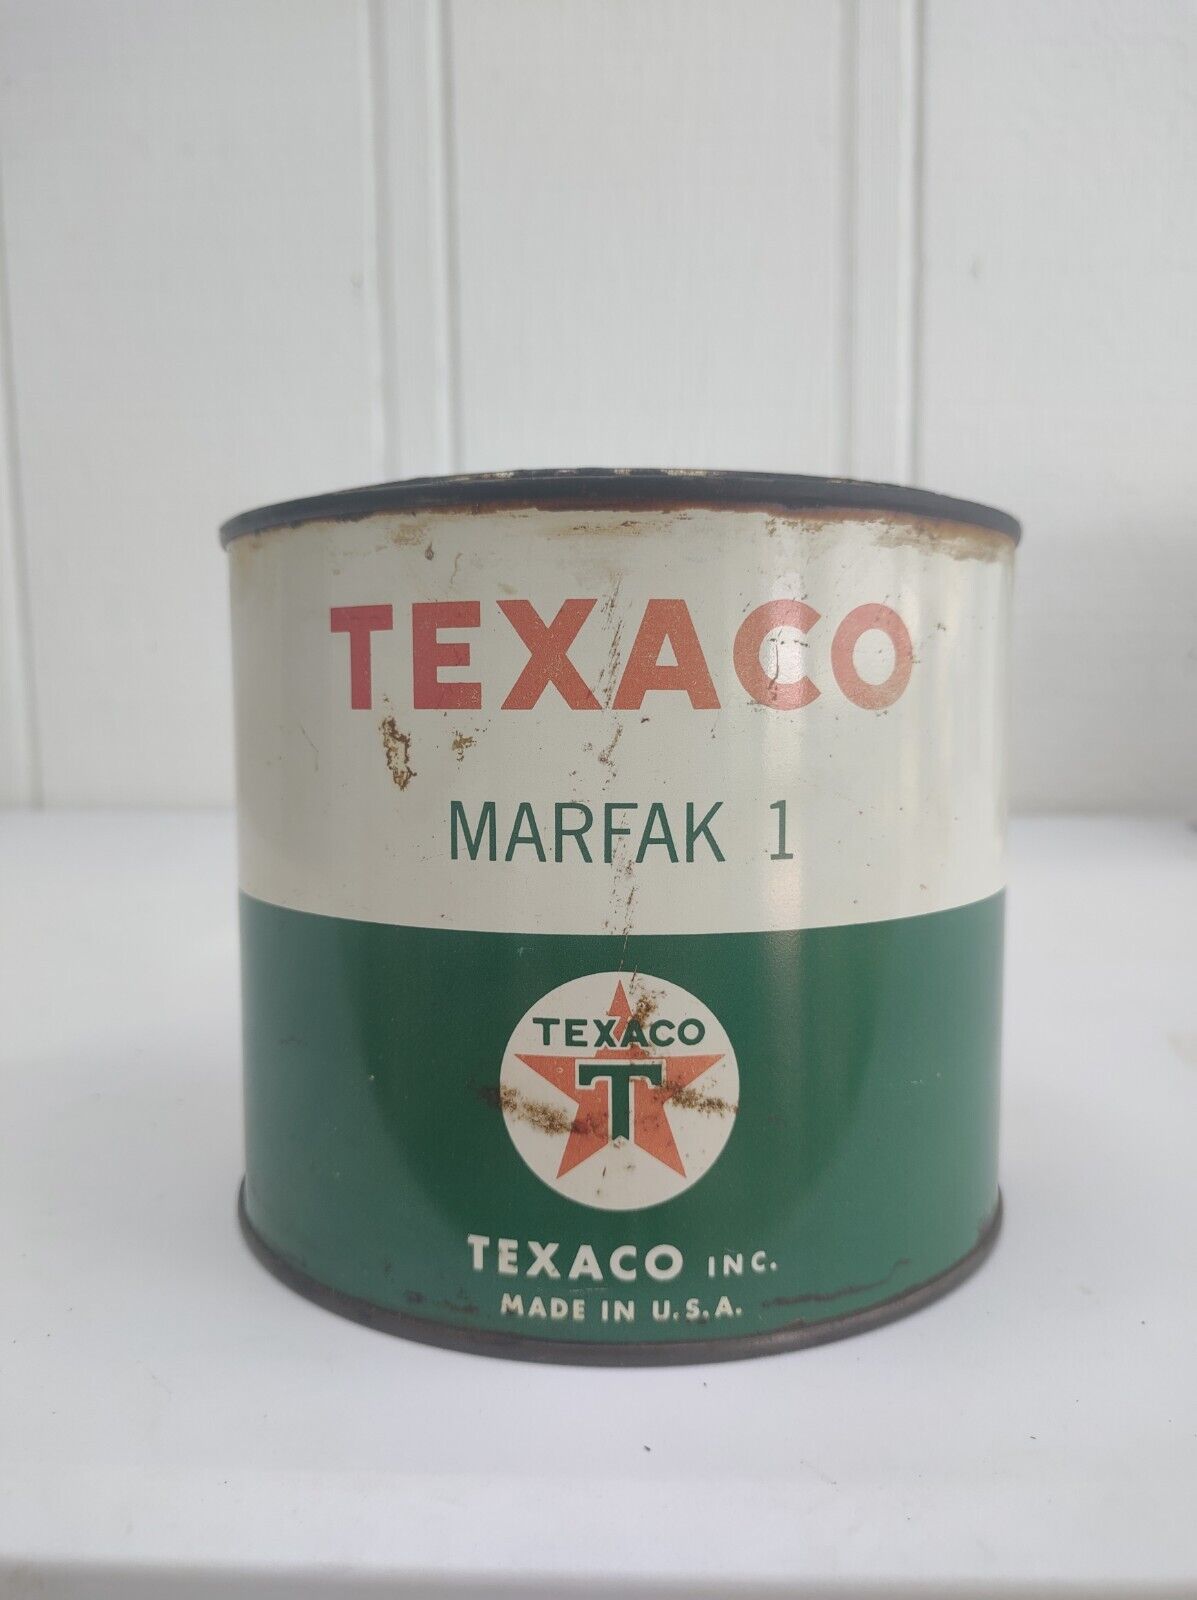 Vintage Texaco Marfak 1 5 LBS Grease Can Gas Service Station Gas Oil USA Full